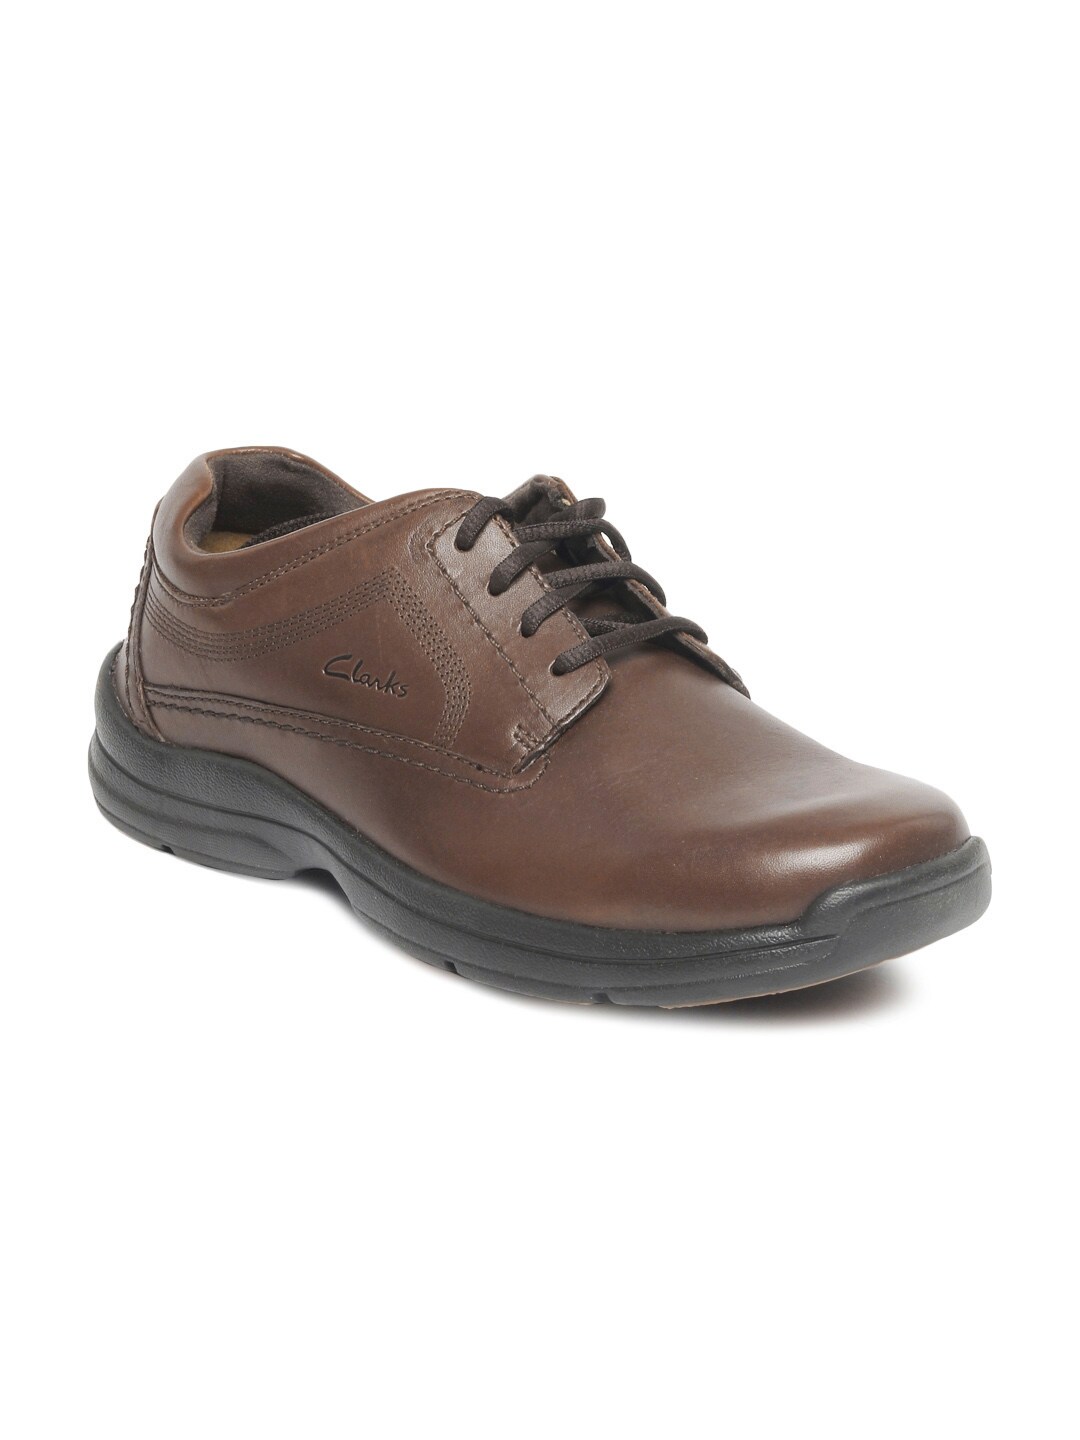 Clarks Men Brown Casual Shoes